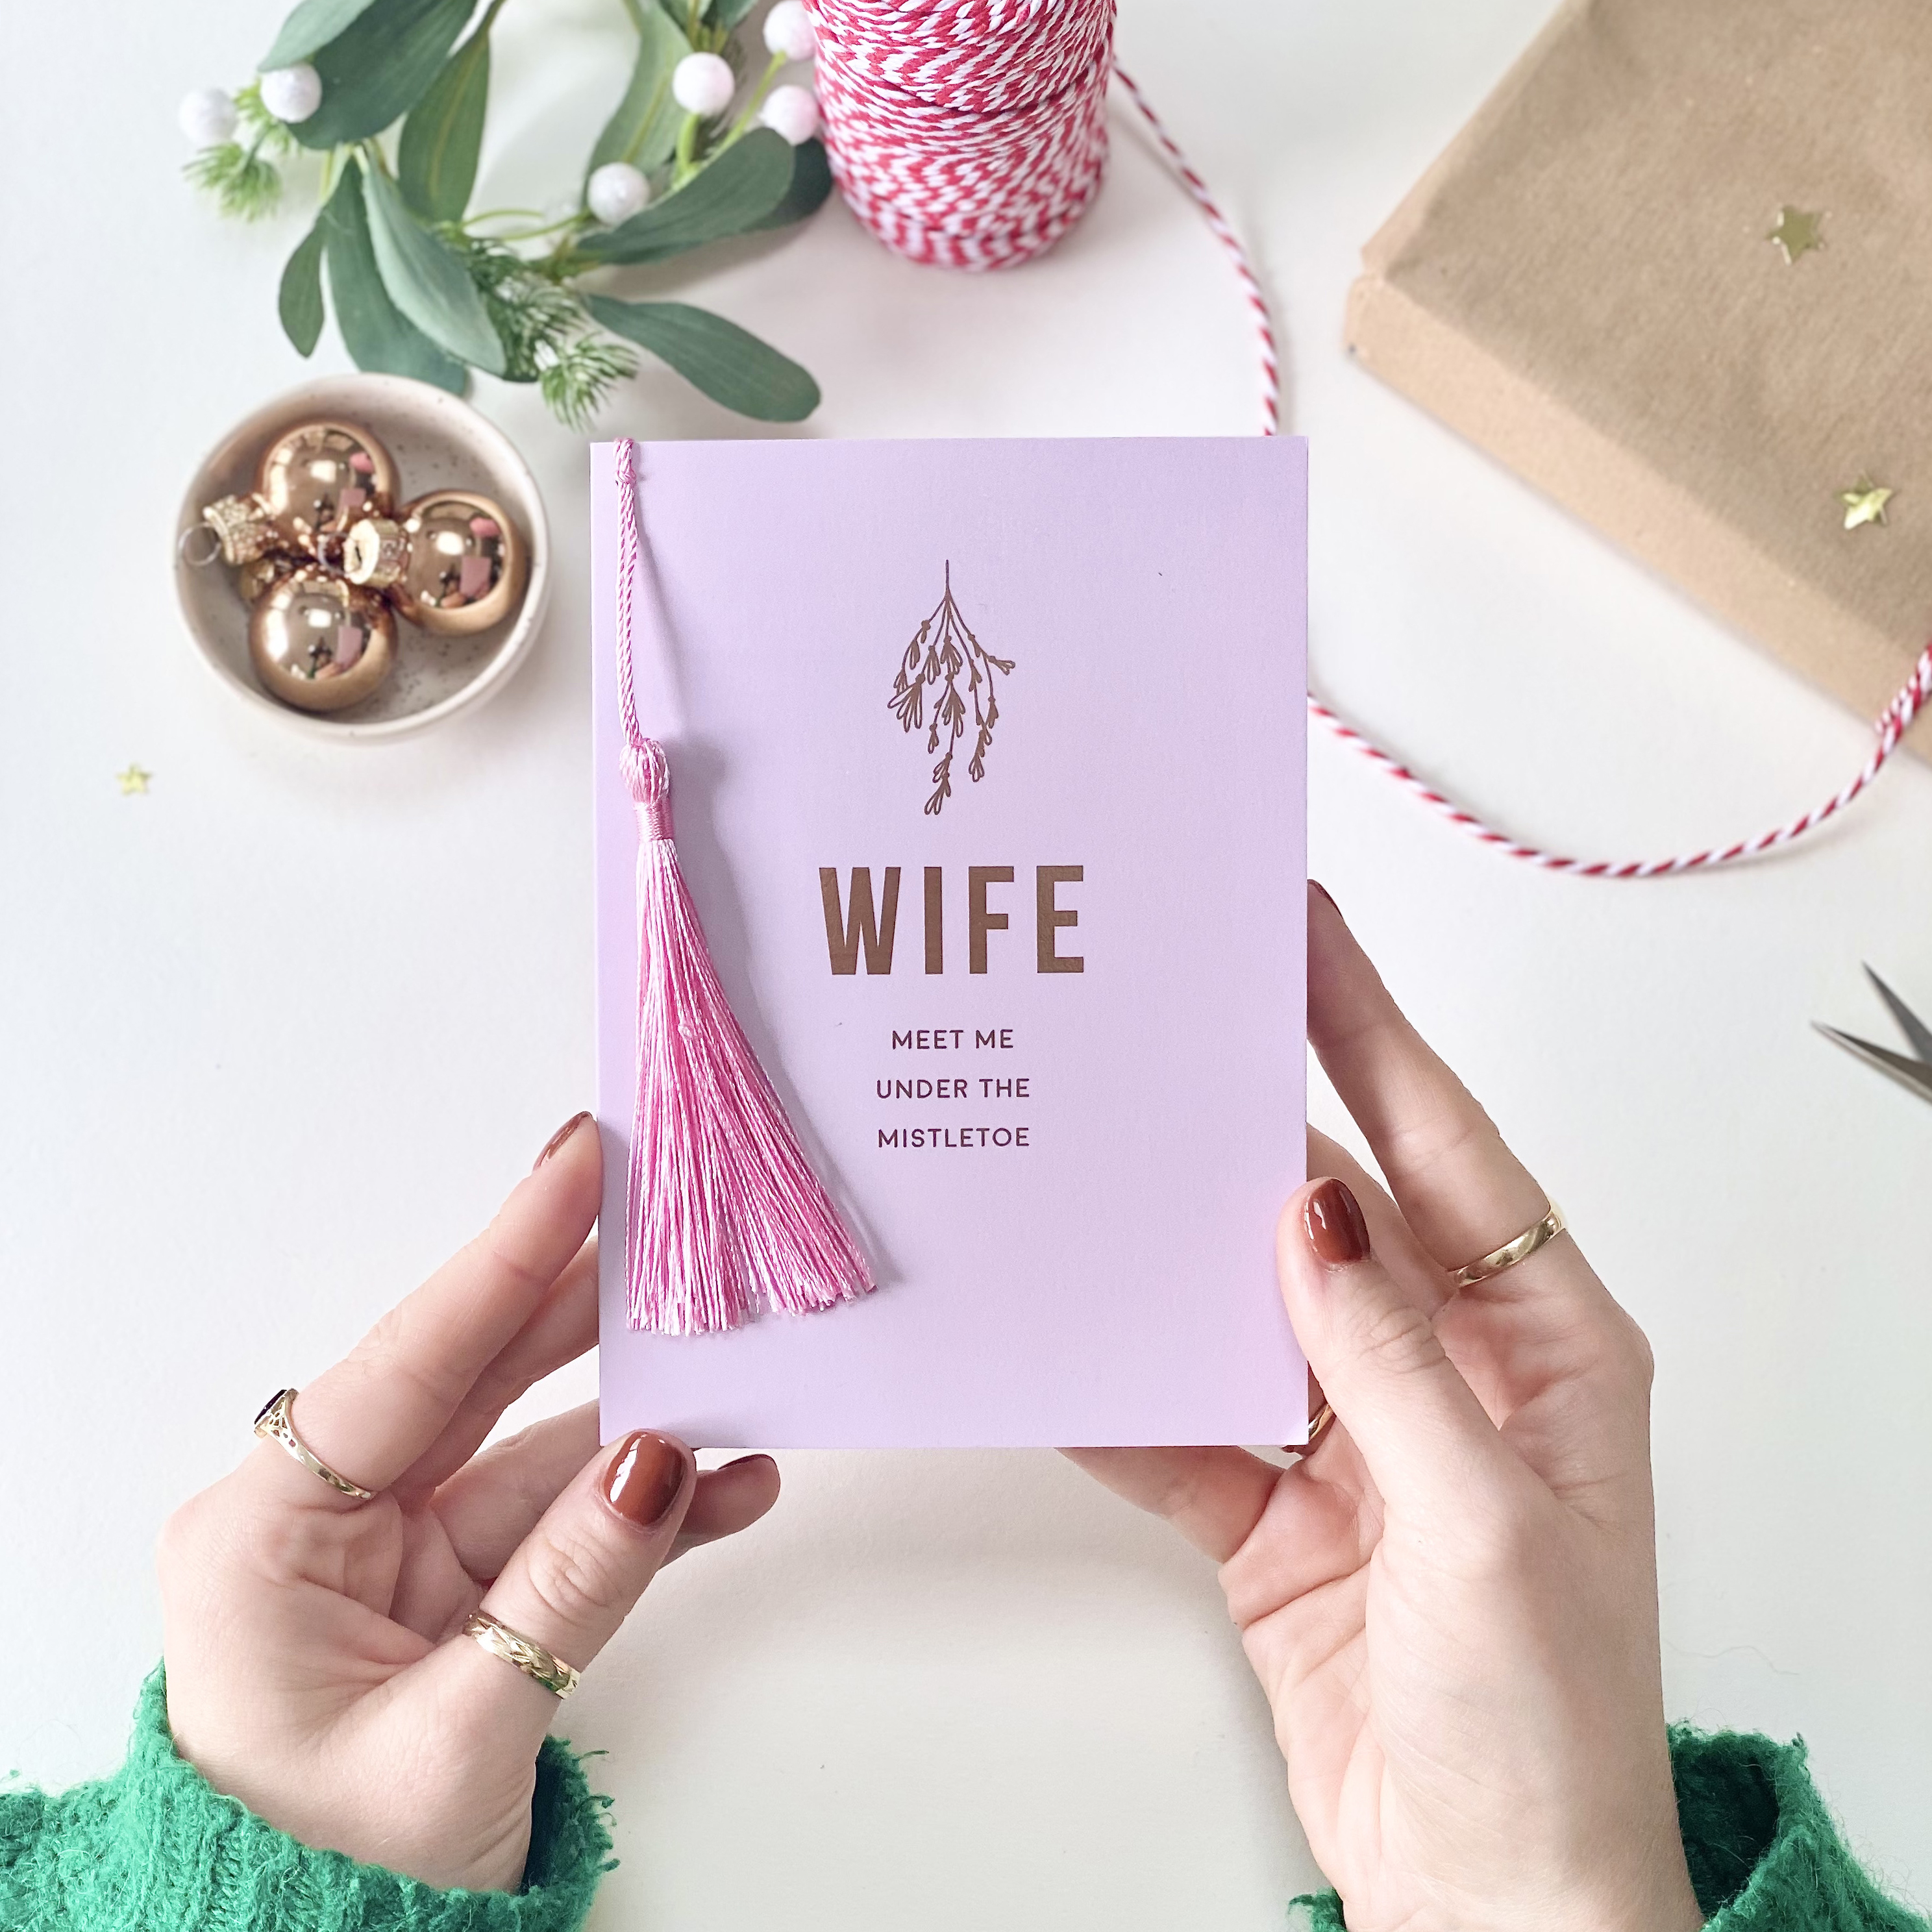 Wife Christmas Card, Luxury Rose gold foil and tassel details. Designed by Rodo Creative